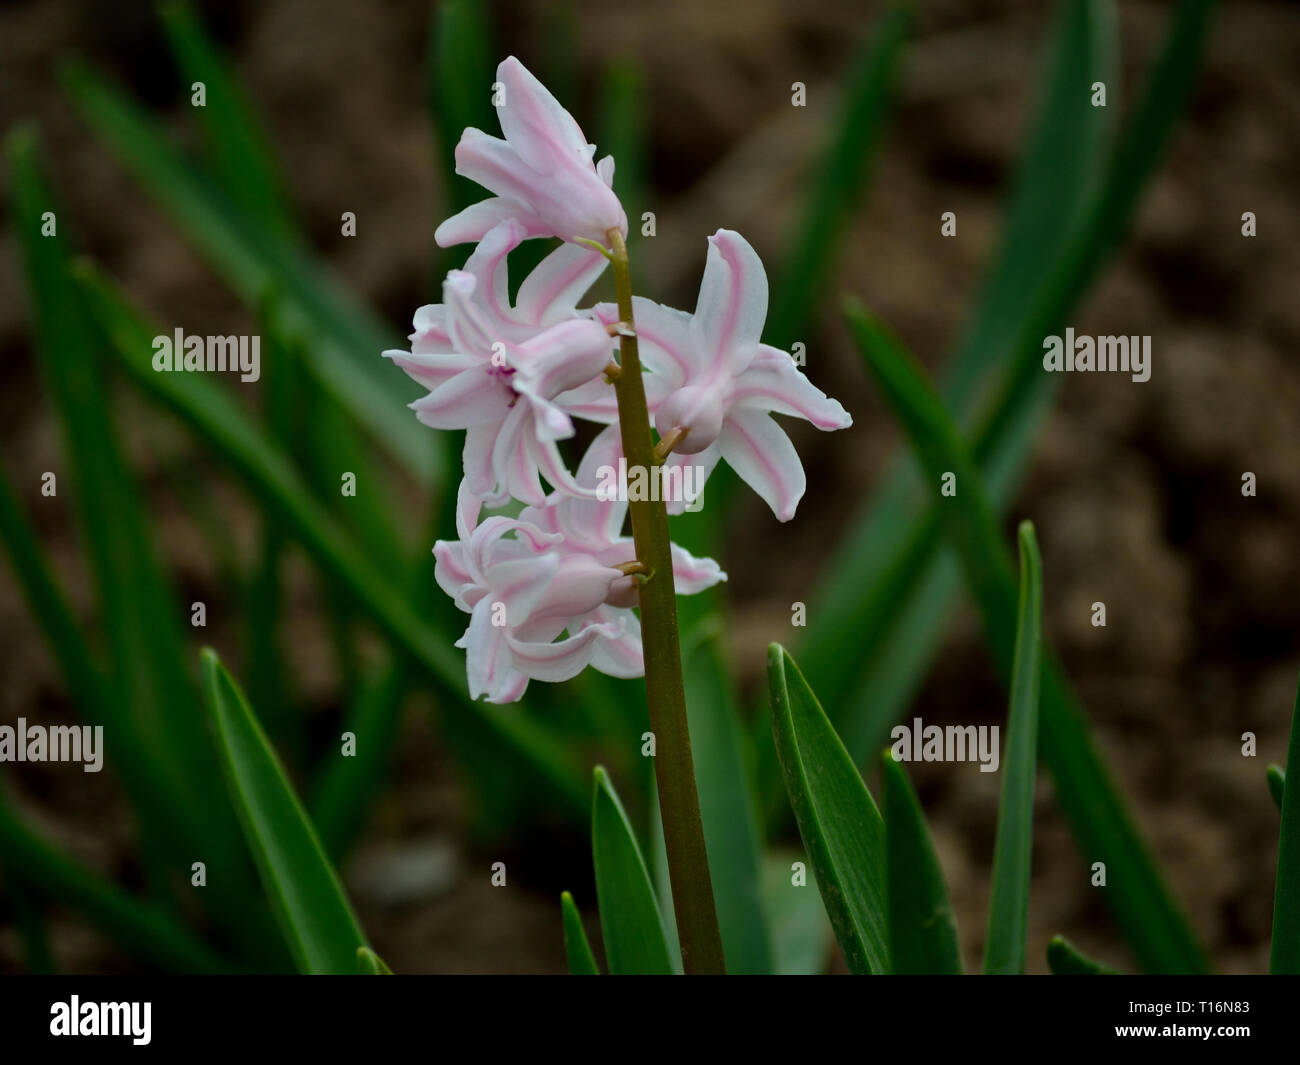 Pink hyacinth in the garden, Hyacinthus orientalis natural form Stock Photo